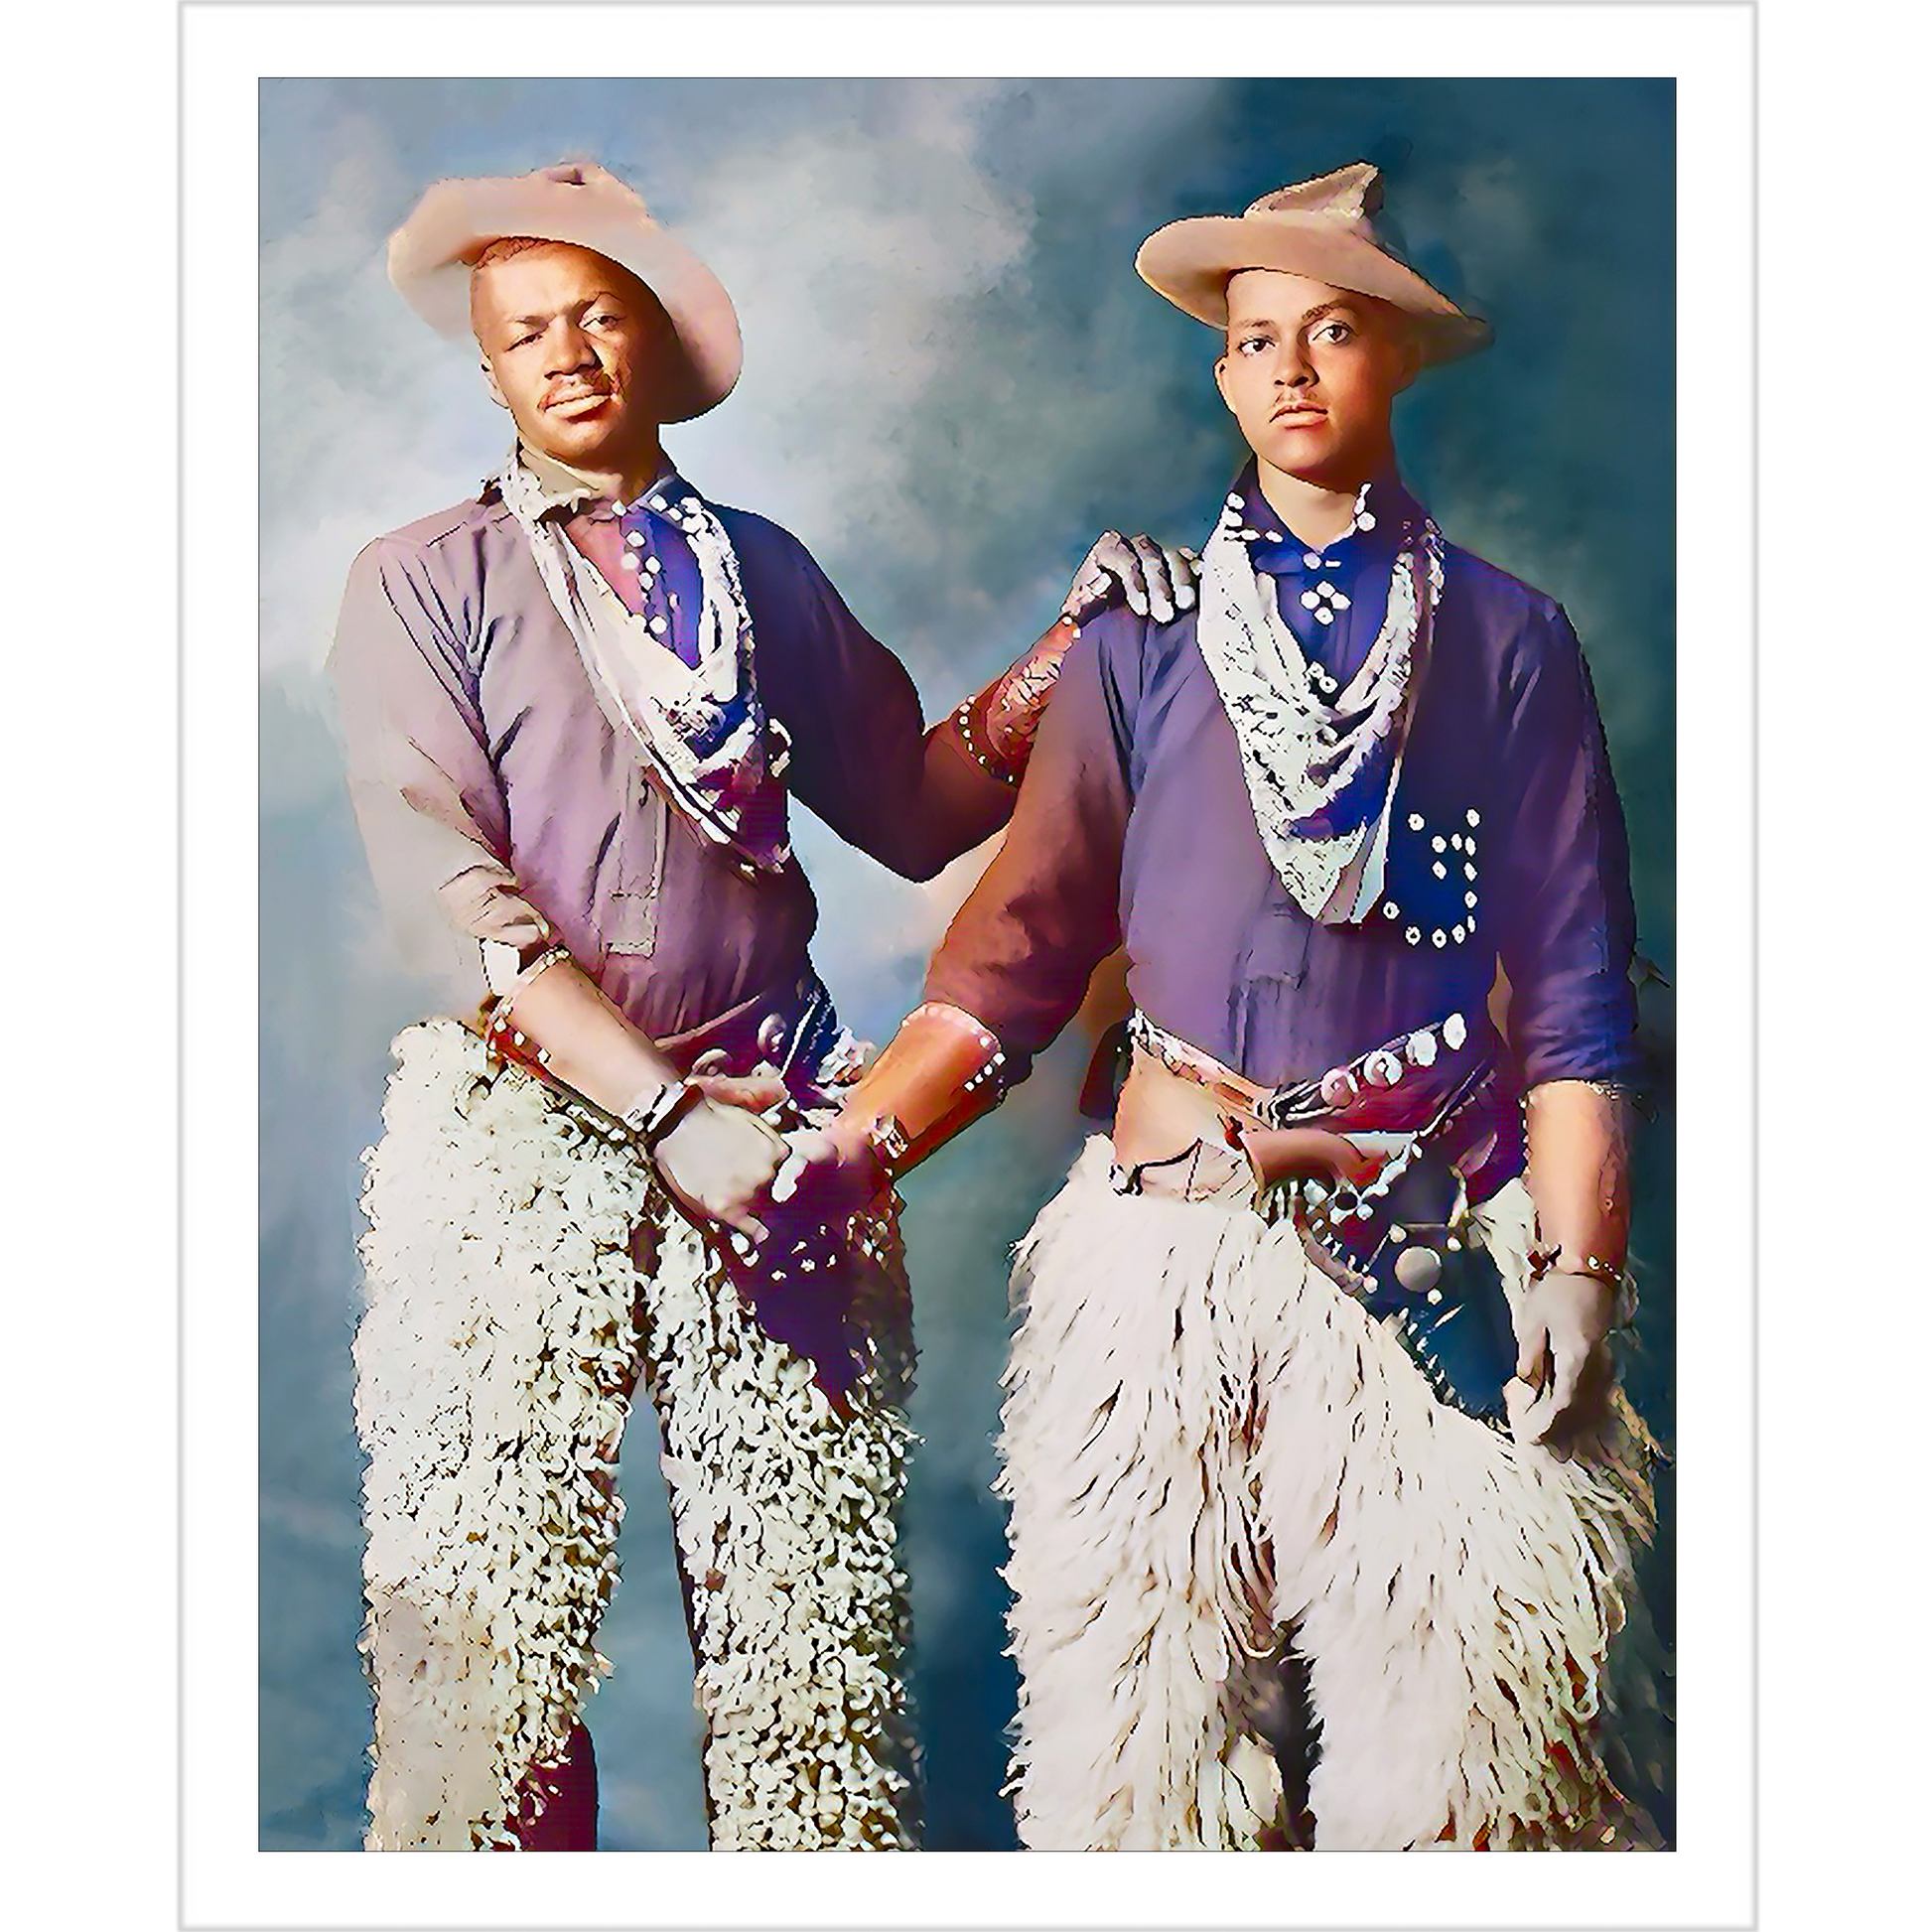 paire 028 | Giclee Artist Print Vintage Affectionate Men Gay Black Afro-American LGBTQ Cowboys